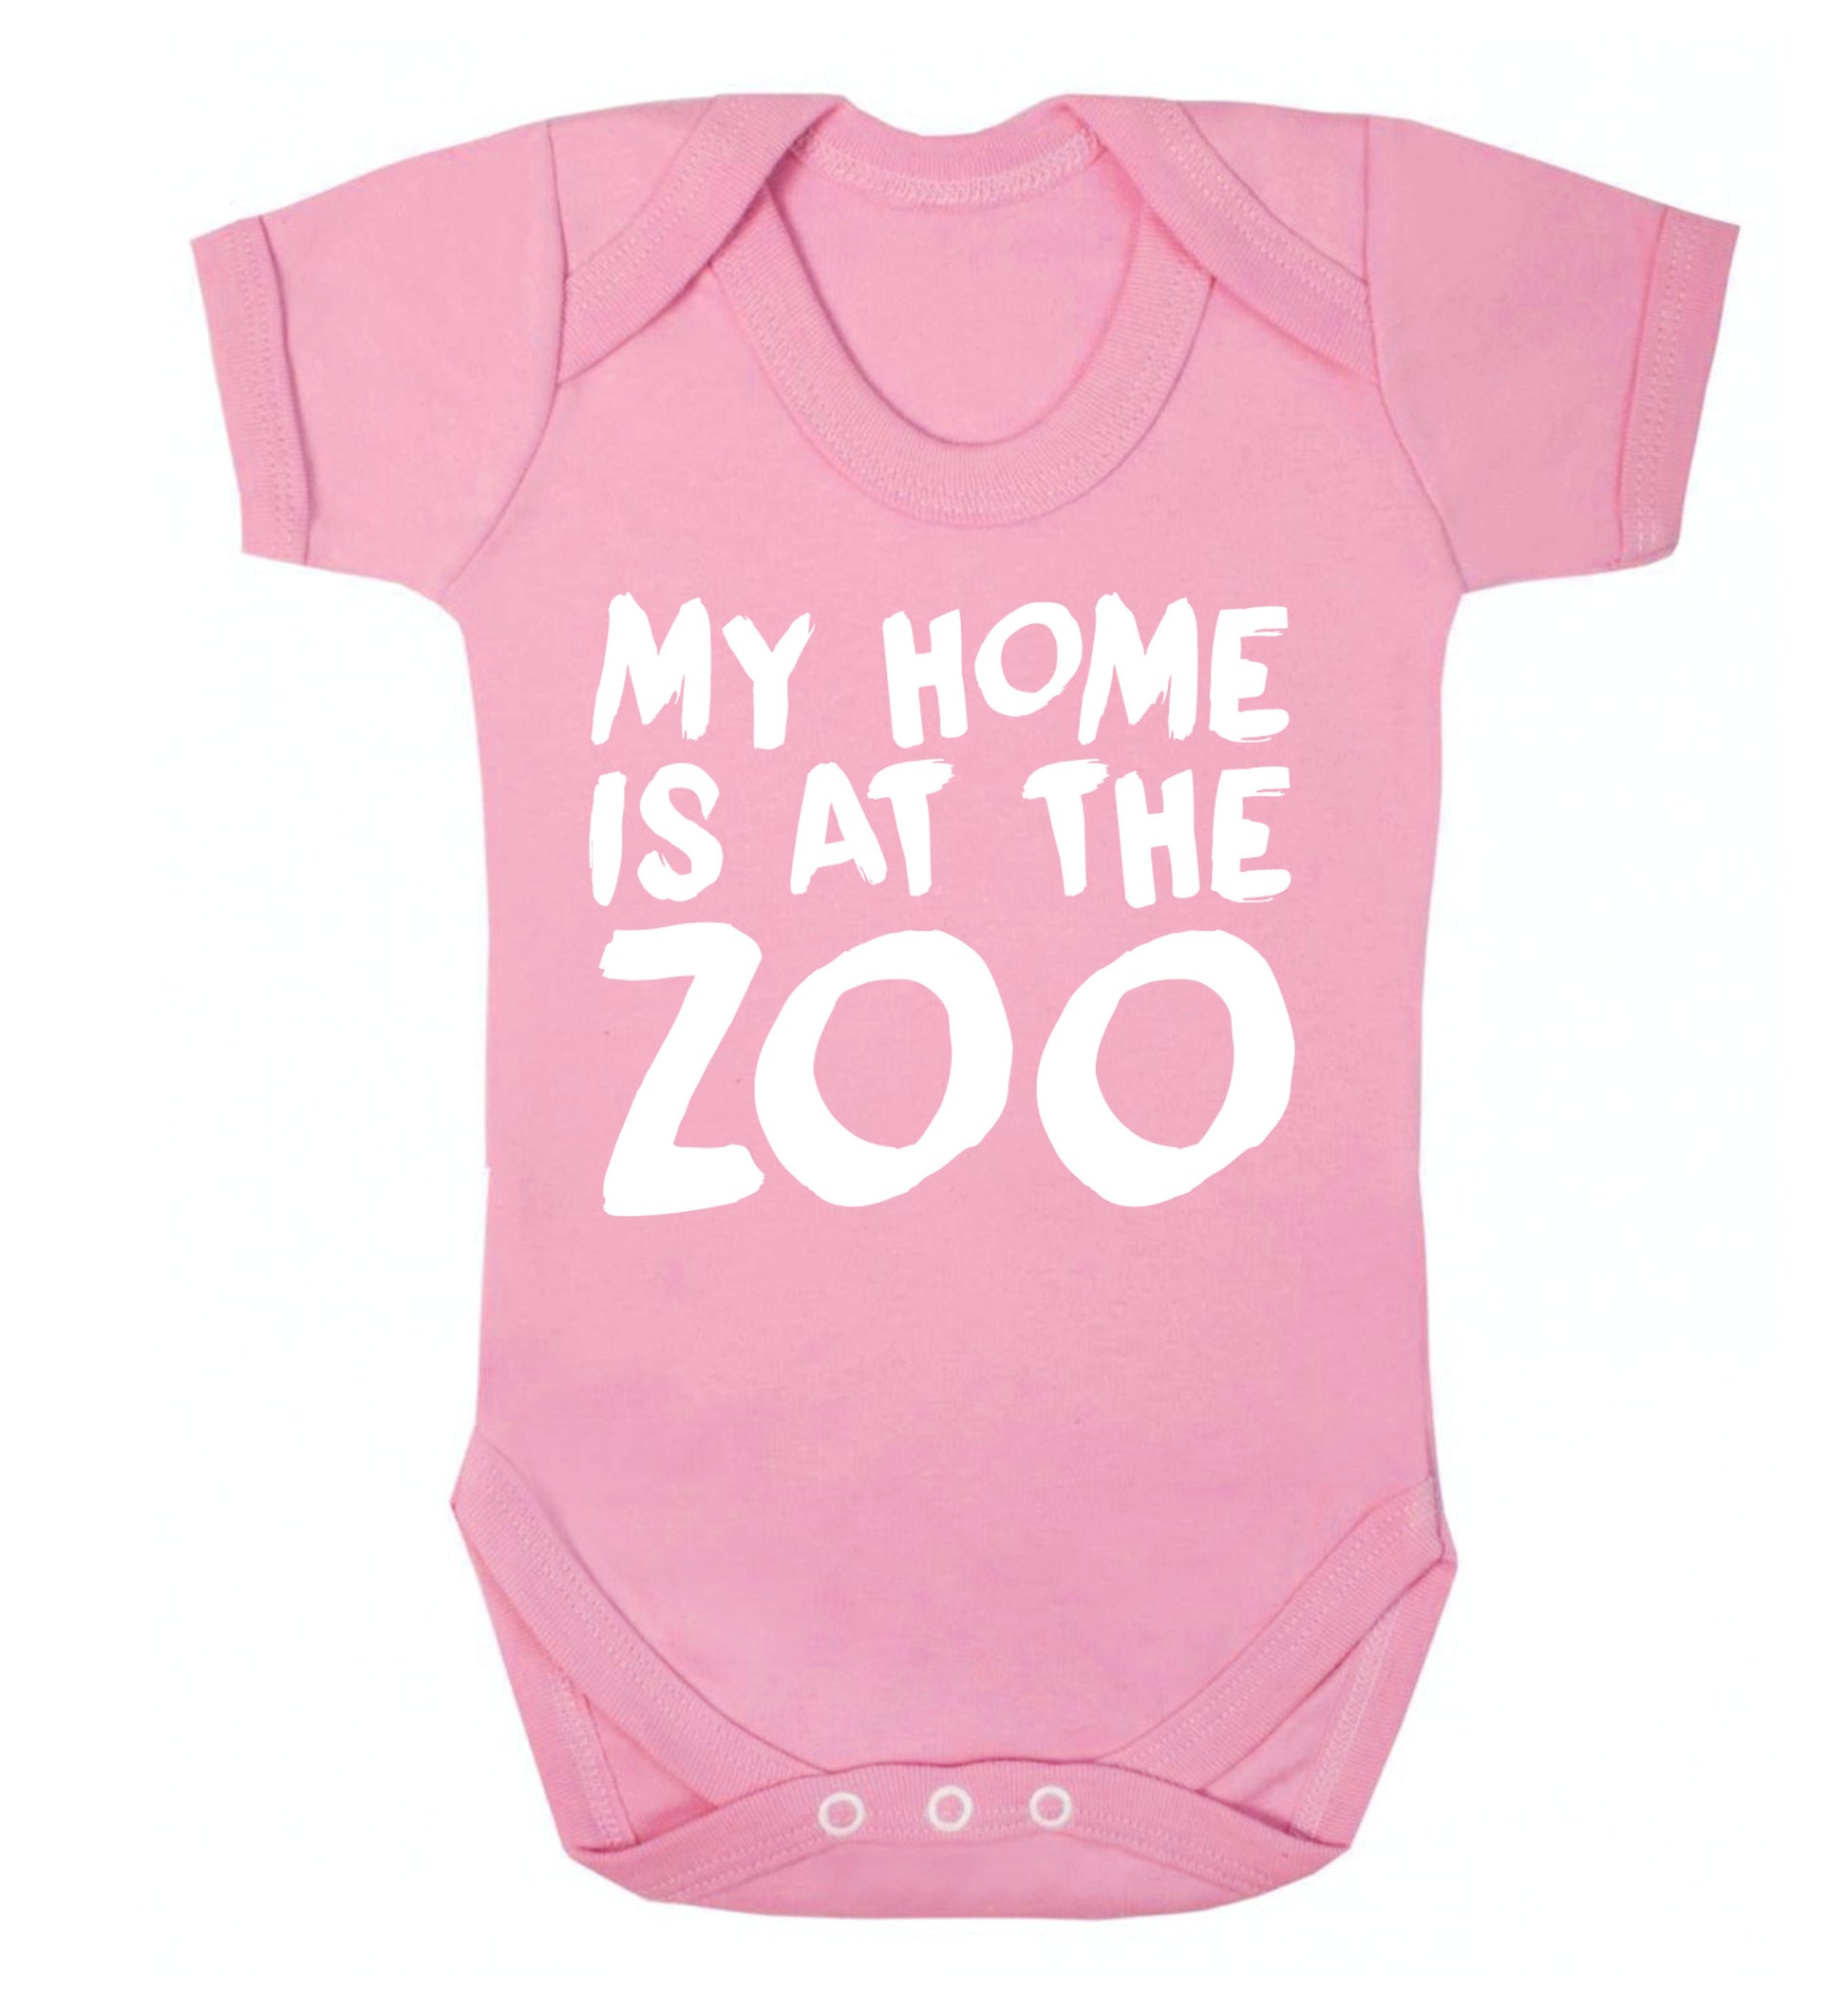 My home is at the zoo Baby Vest pale pink 18-24 months